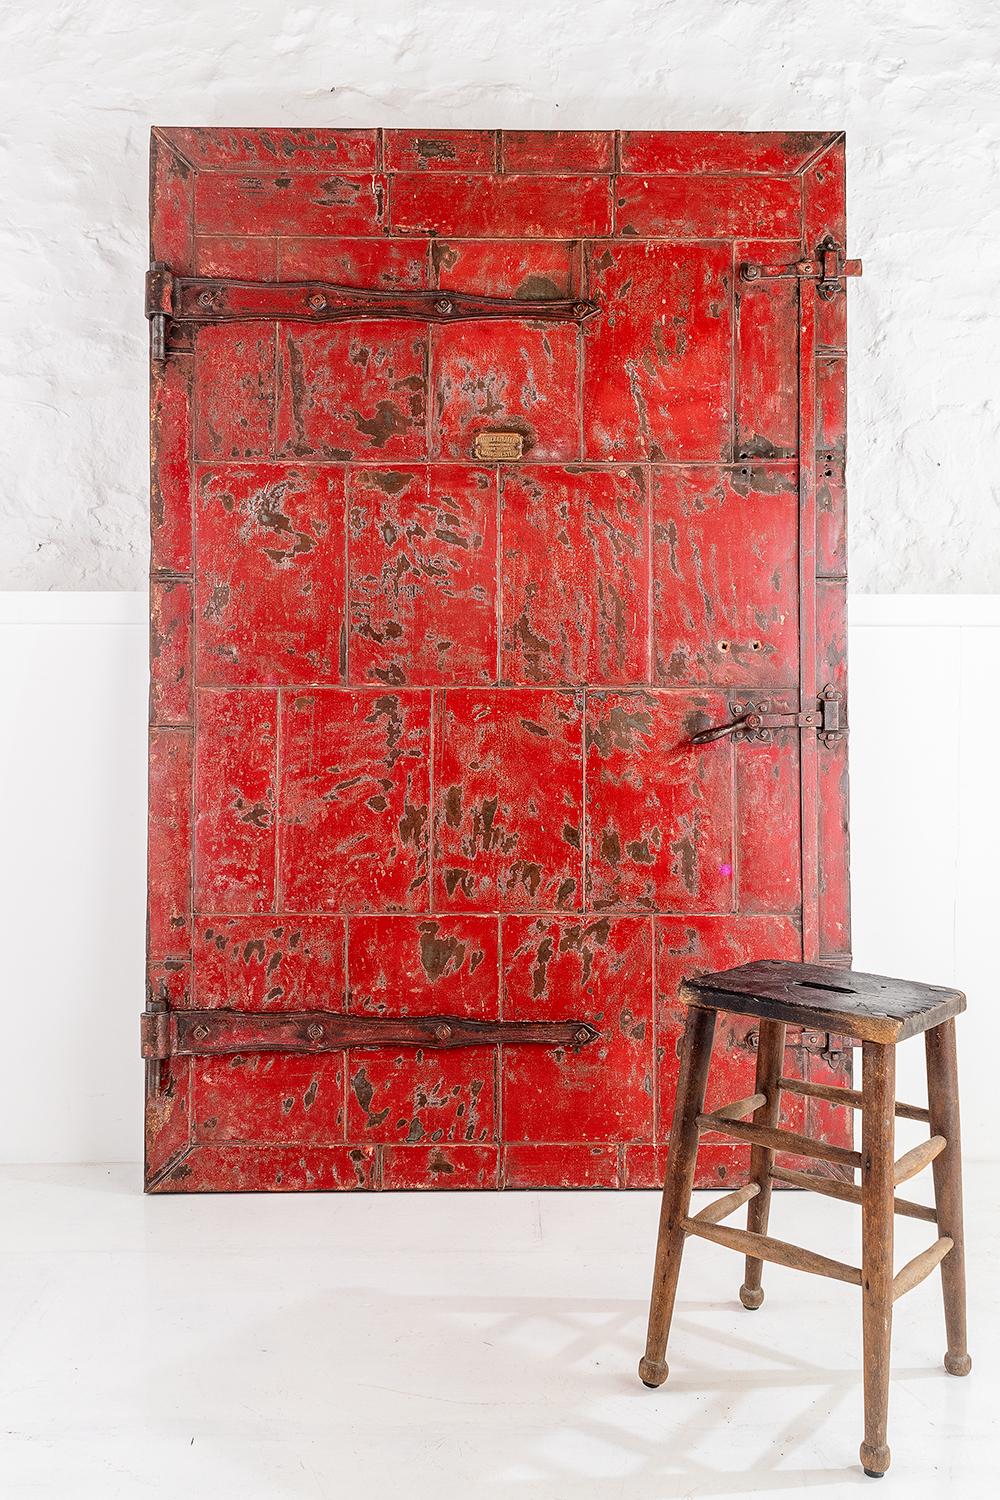 What a door!
Manufactured by Mather & Platt Ltd of Manchester, England.
The doors stands at over 7ft high and nearly 5ft wide, the steel patchwork is all intact and the door is finished in its original red paint with a wonderful aged patina. The